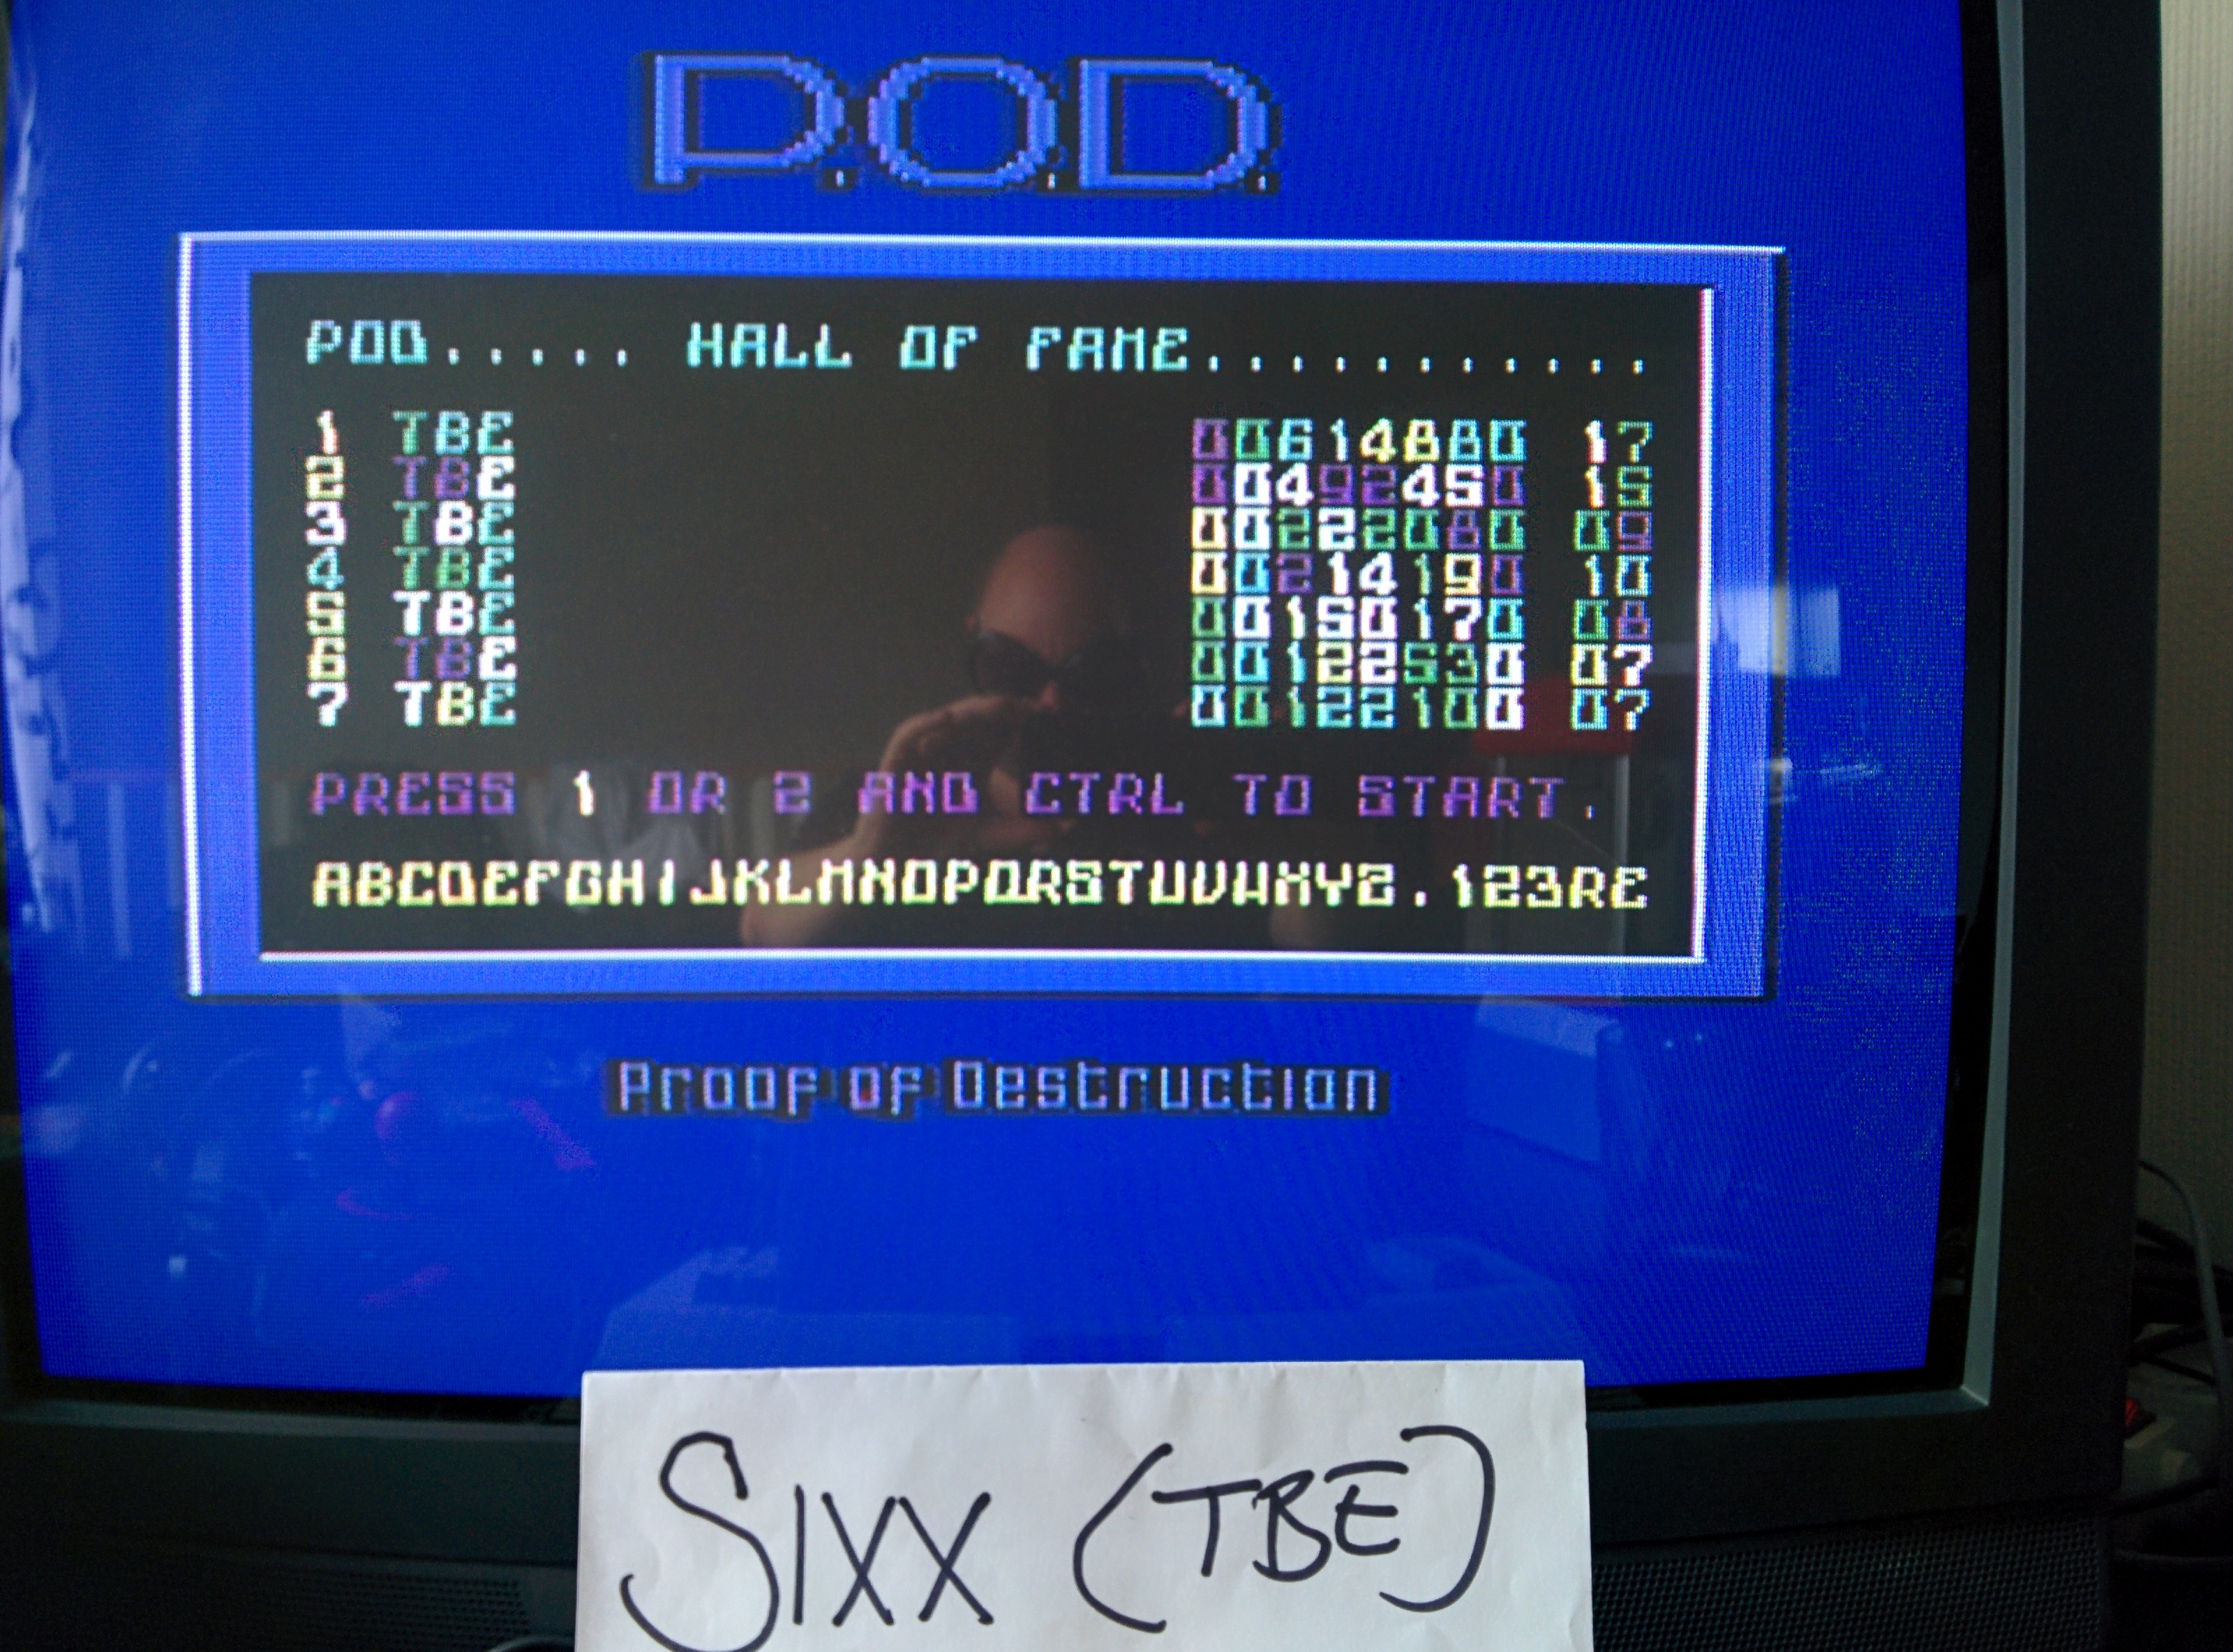 Sixx: Proof of Destruction [P.O.D.] (Commodore 64) 614,880 points on 2014-05-14 10:18:31